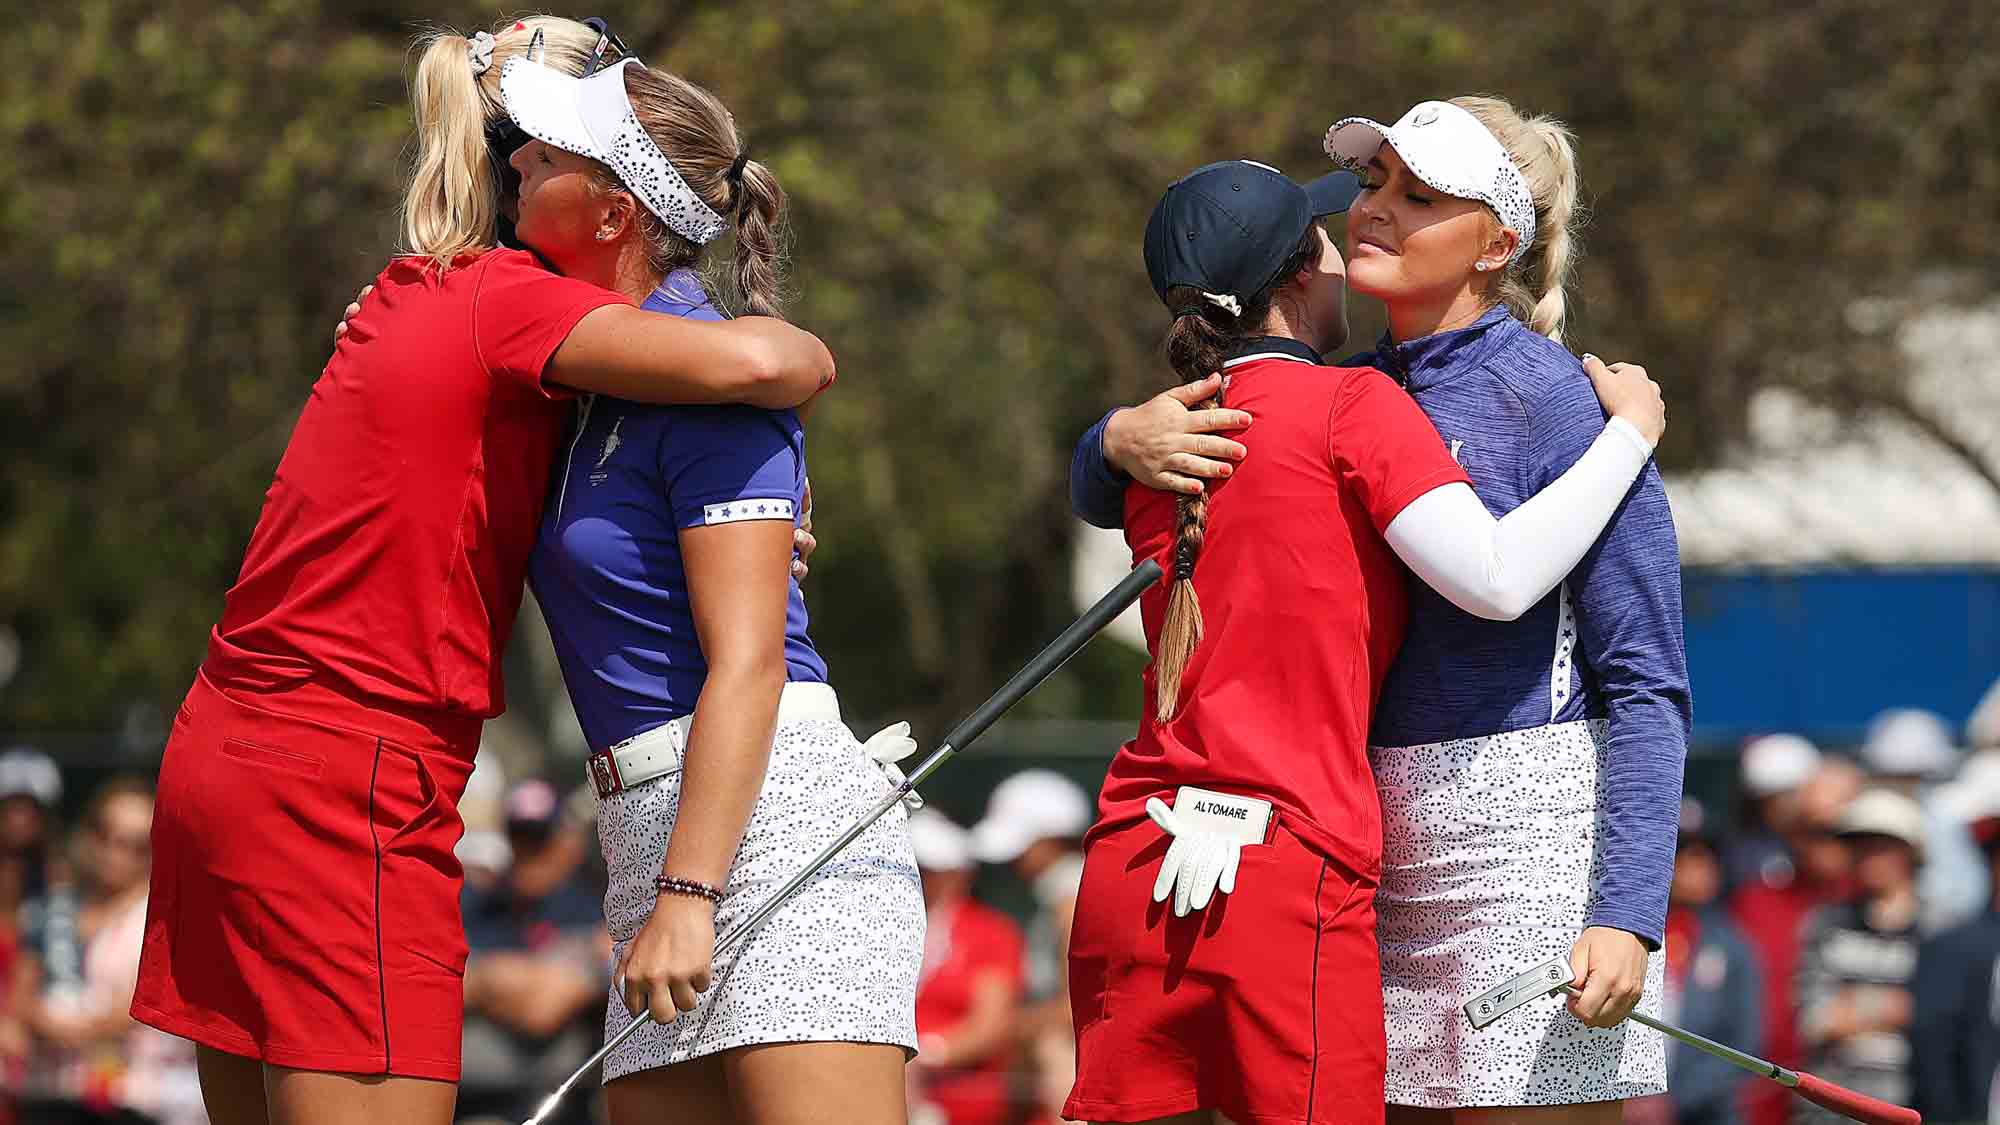 Teams during the Morning foursomes on Day 1 of the Solheim Cup